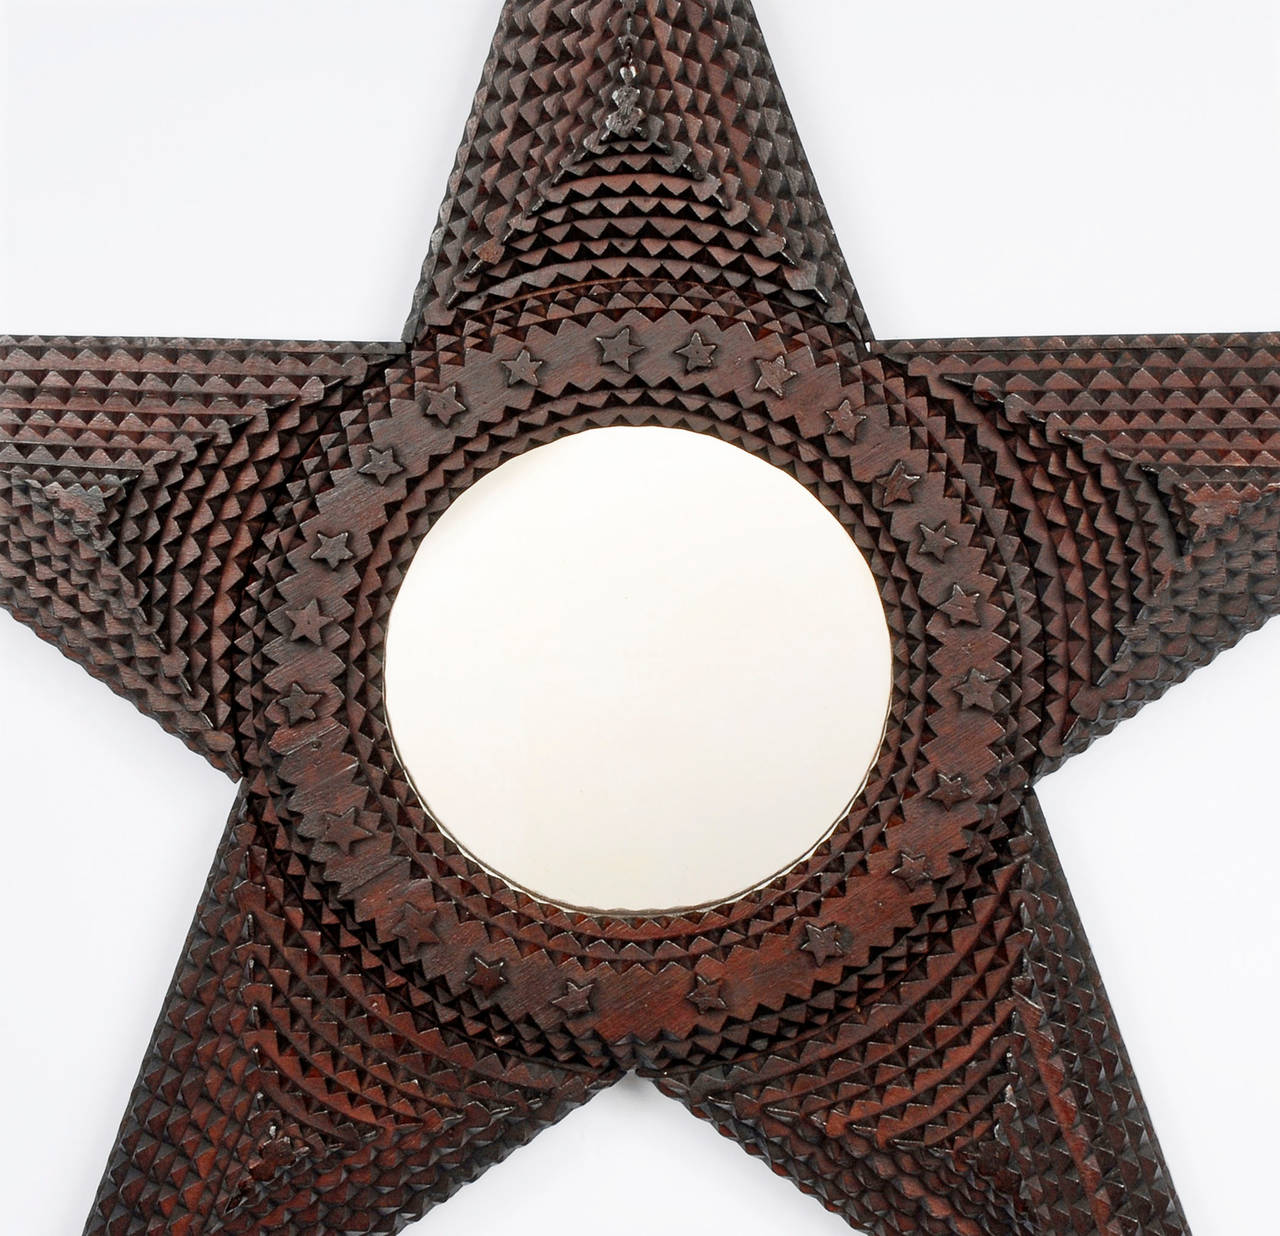 Fine large star-shaped Tramp Art mirror embellished with carved stars and a round opening. Deeply layered and made out of whiskey crates. Rare form.

Found in upstate NY.
circa 1890.